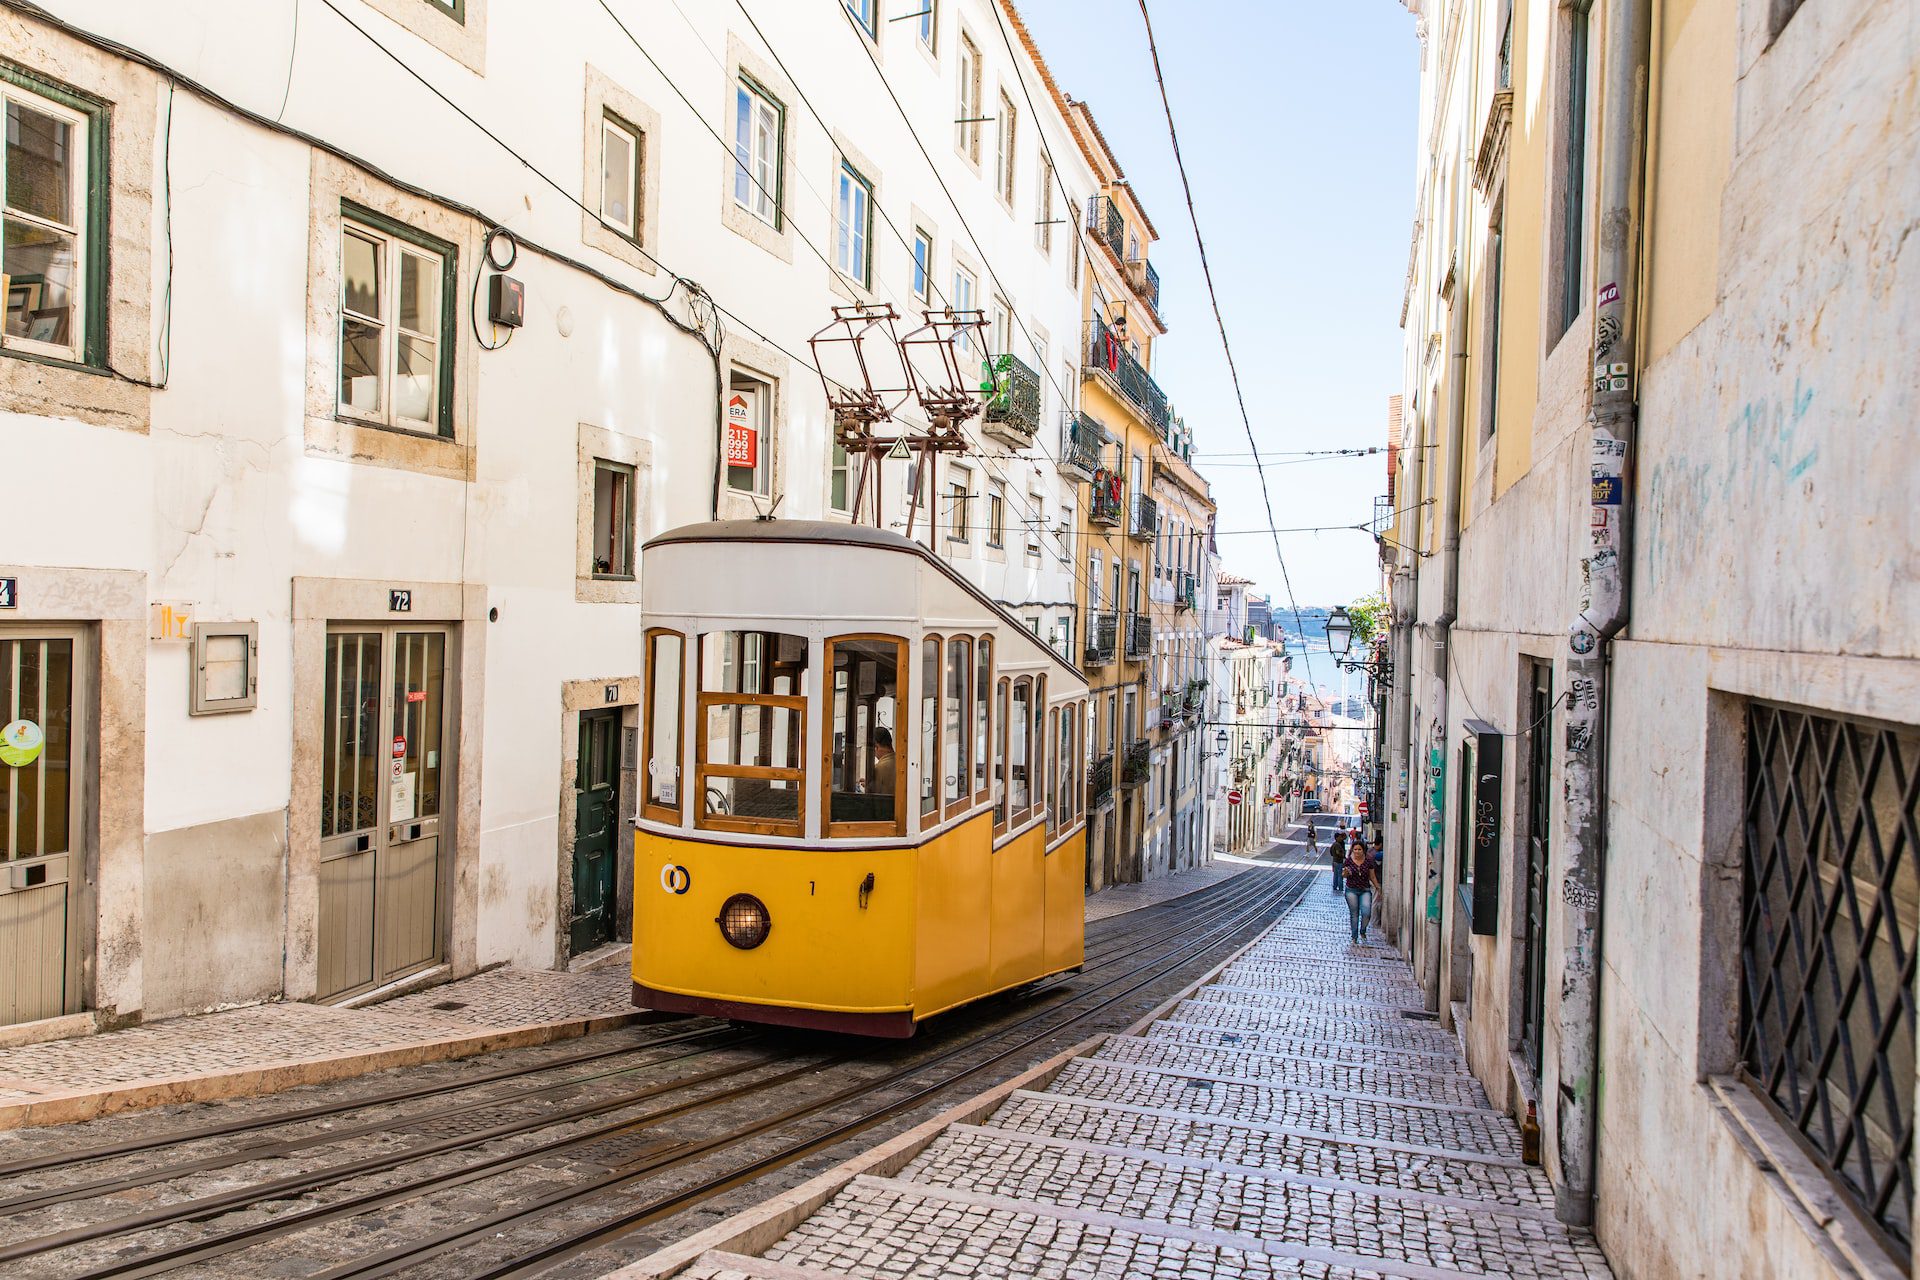 A yellow tram on a steep cobbled street lined with white and yellow buildings.